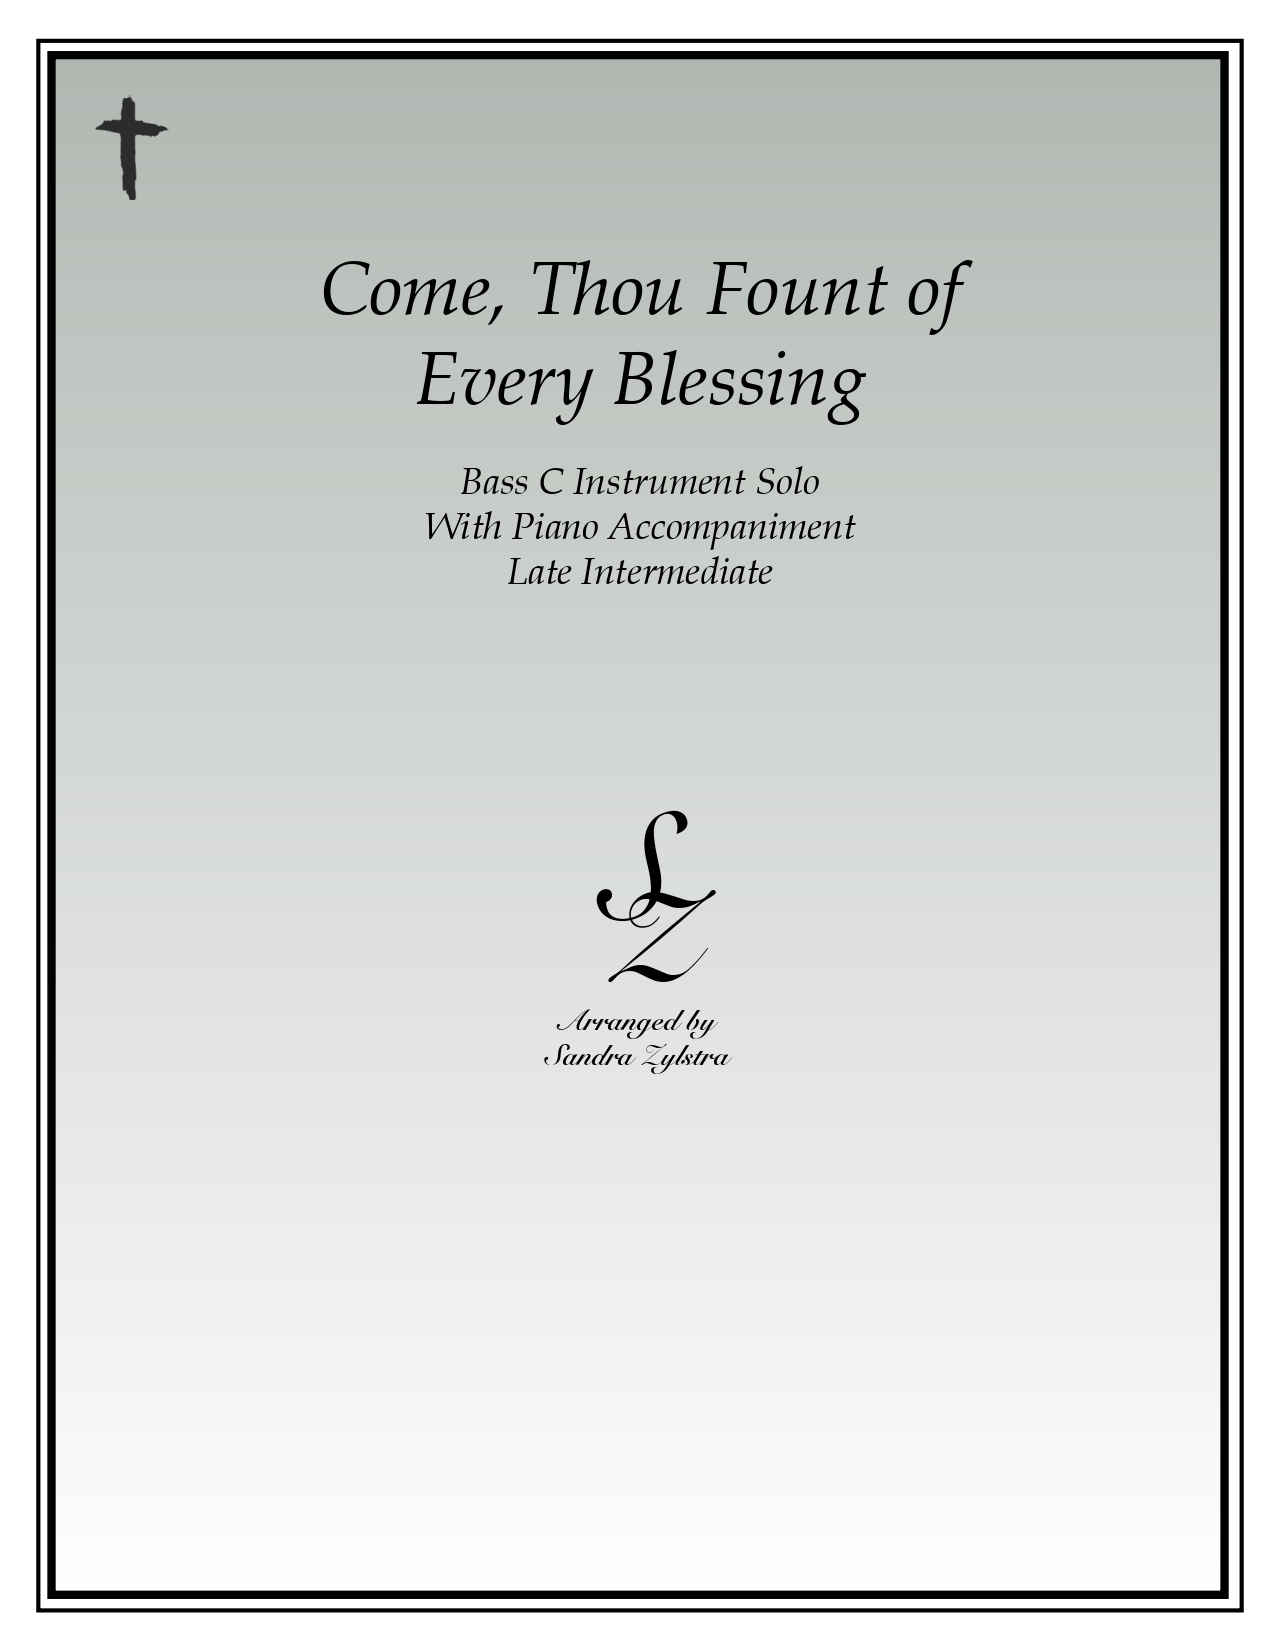 Come Thou Fount Of Every Blessing bass C instrument solo part cover page 00011